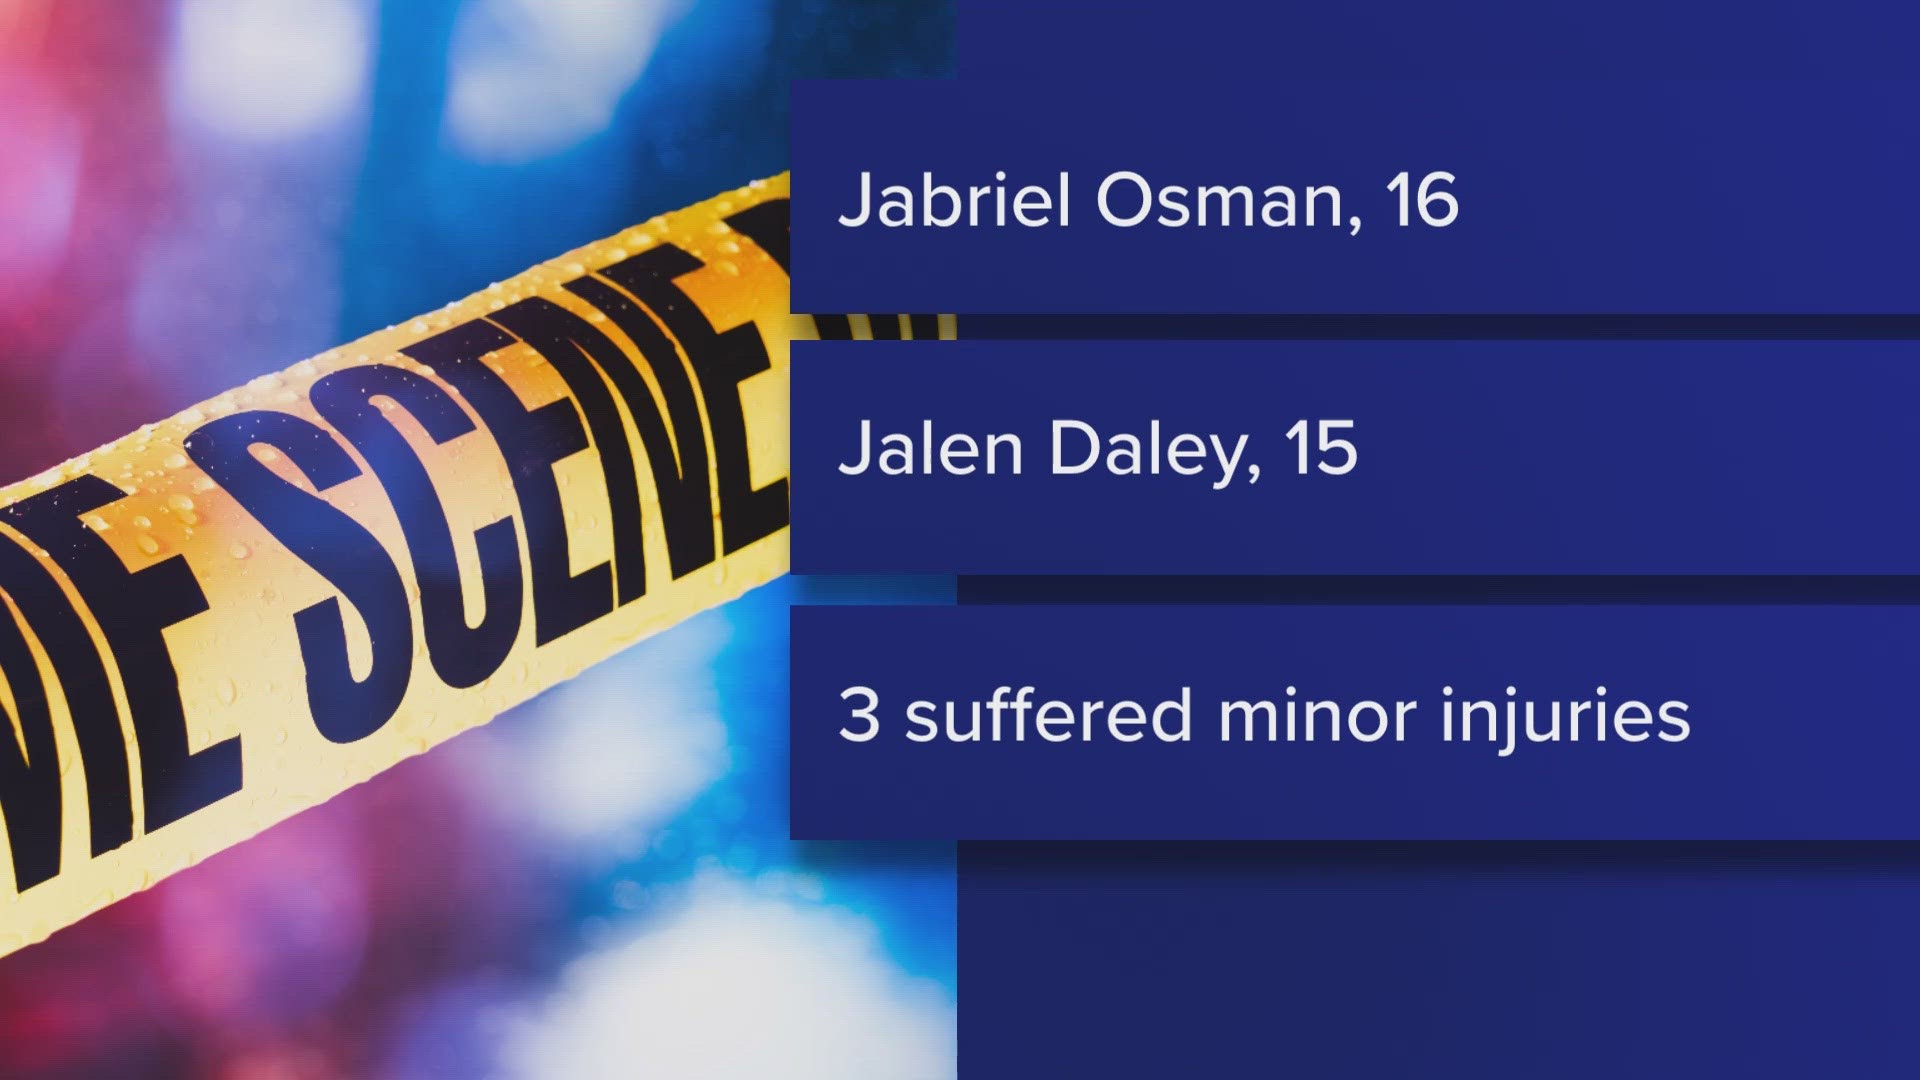 The Franklin County Coroner's Office identified them on Tuesday as 16-year-old Jabriel Osman and 15-year-old Jalen Daley.